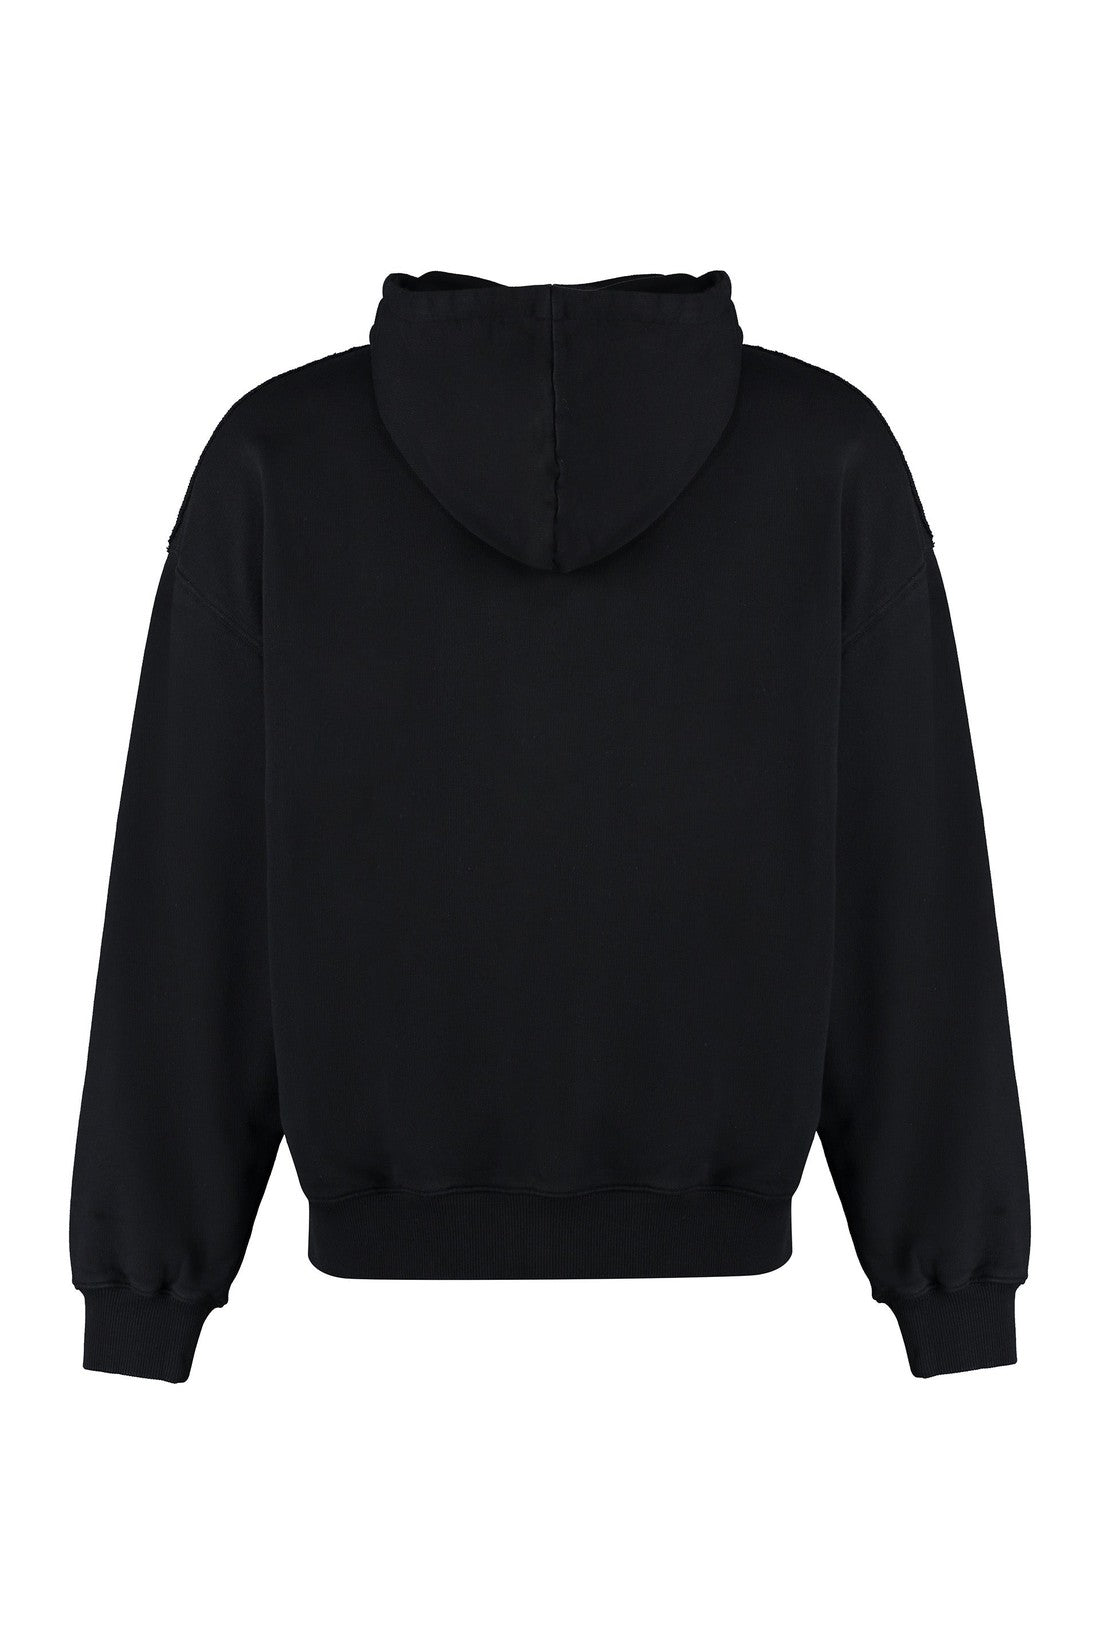 Axel Arigato-OUTLET-SALE-Honor full zip cotton hoodie-ARCHIVIST